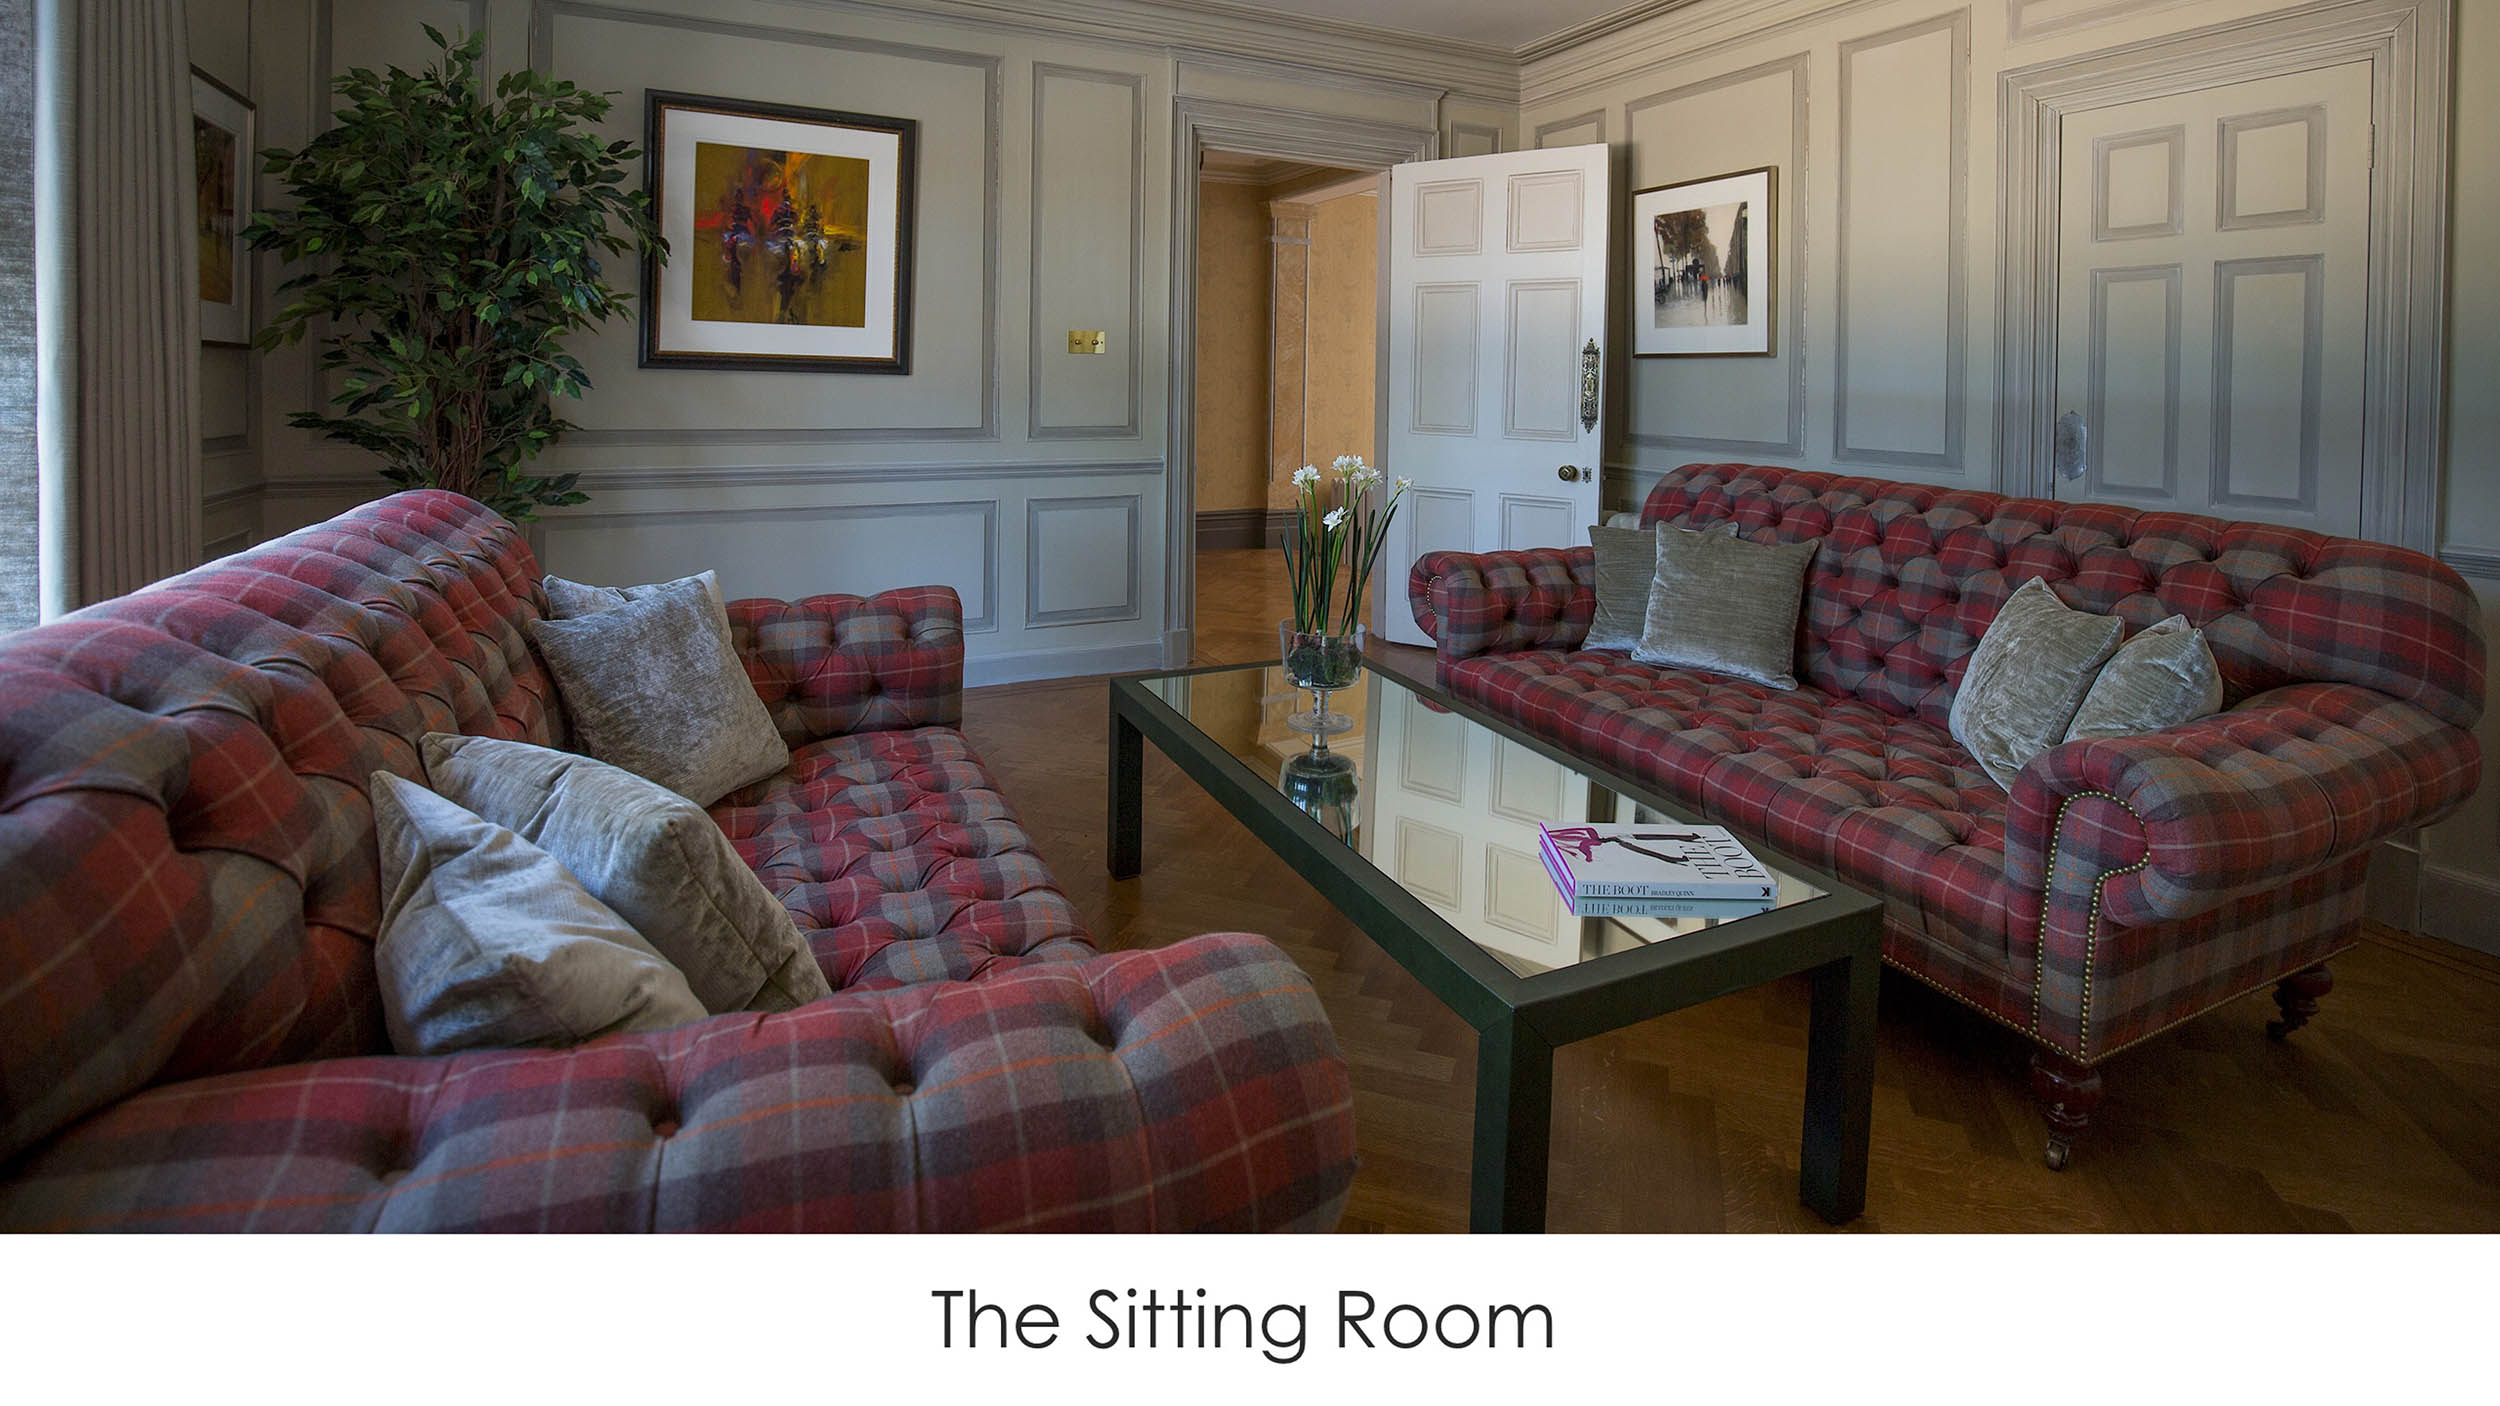 The Sitting Room - Pennybridge House - Real Estate Development Projects by Gabriella Atkinson.